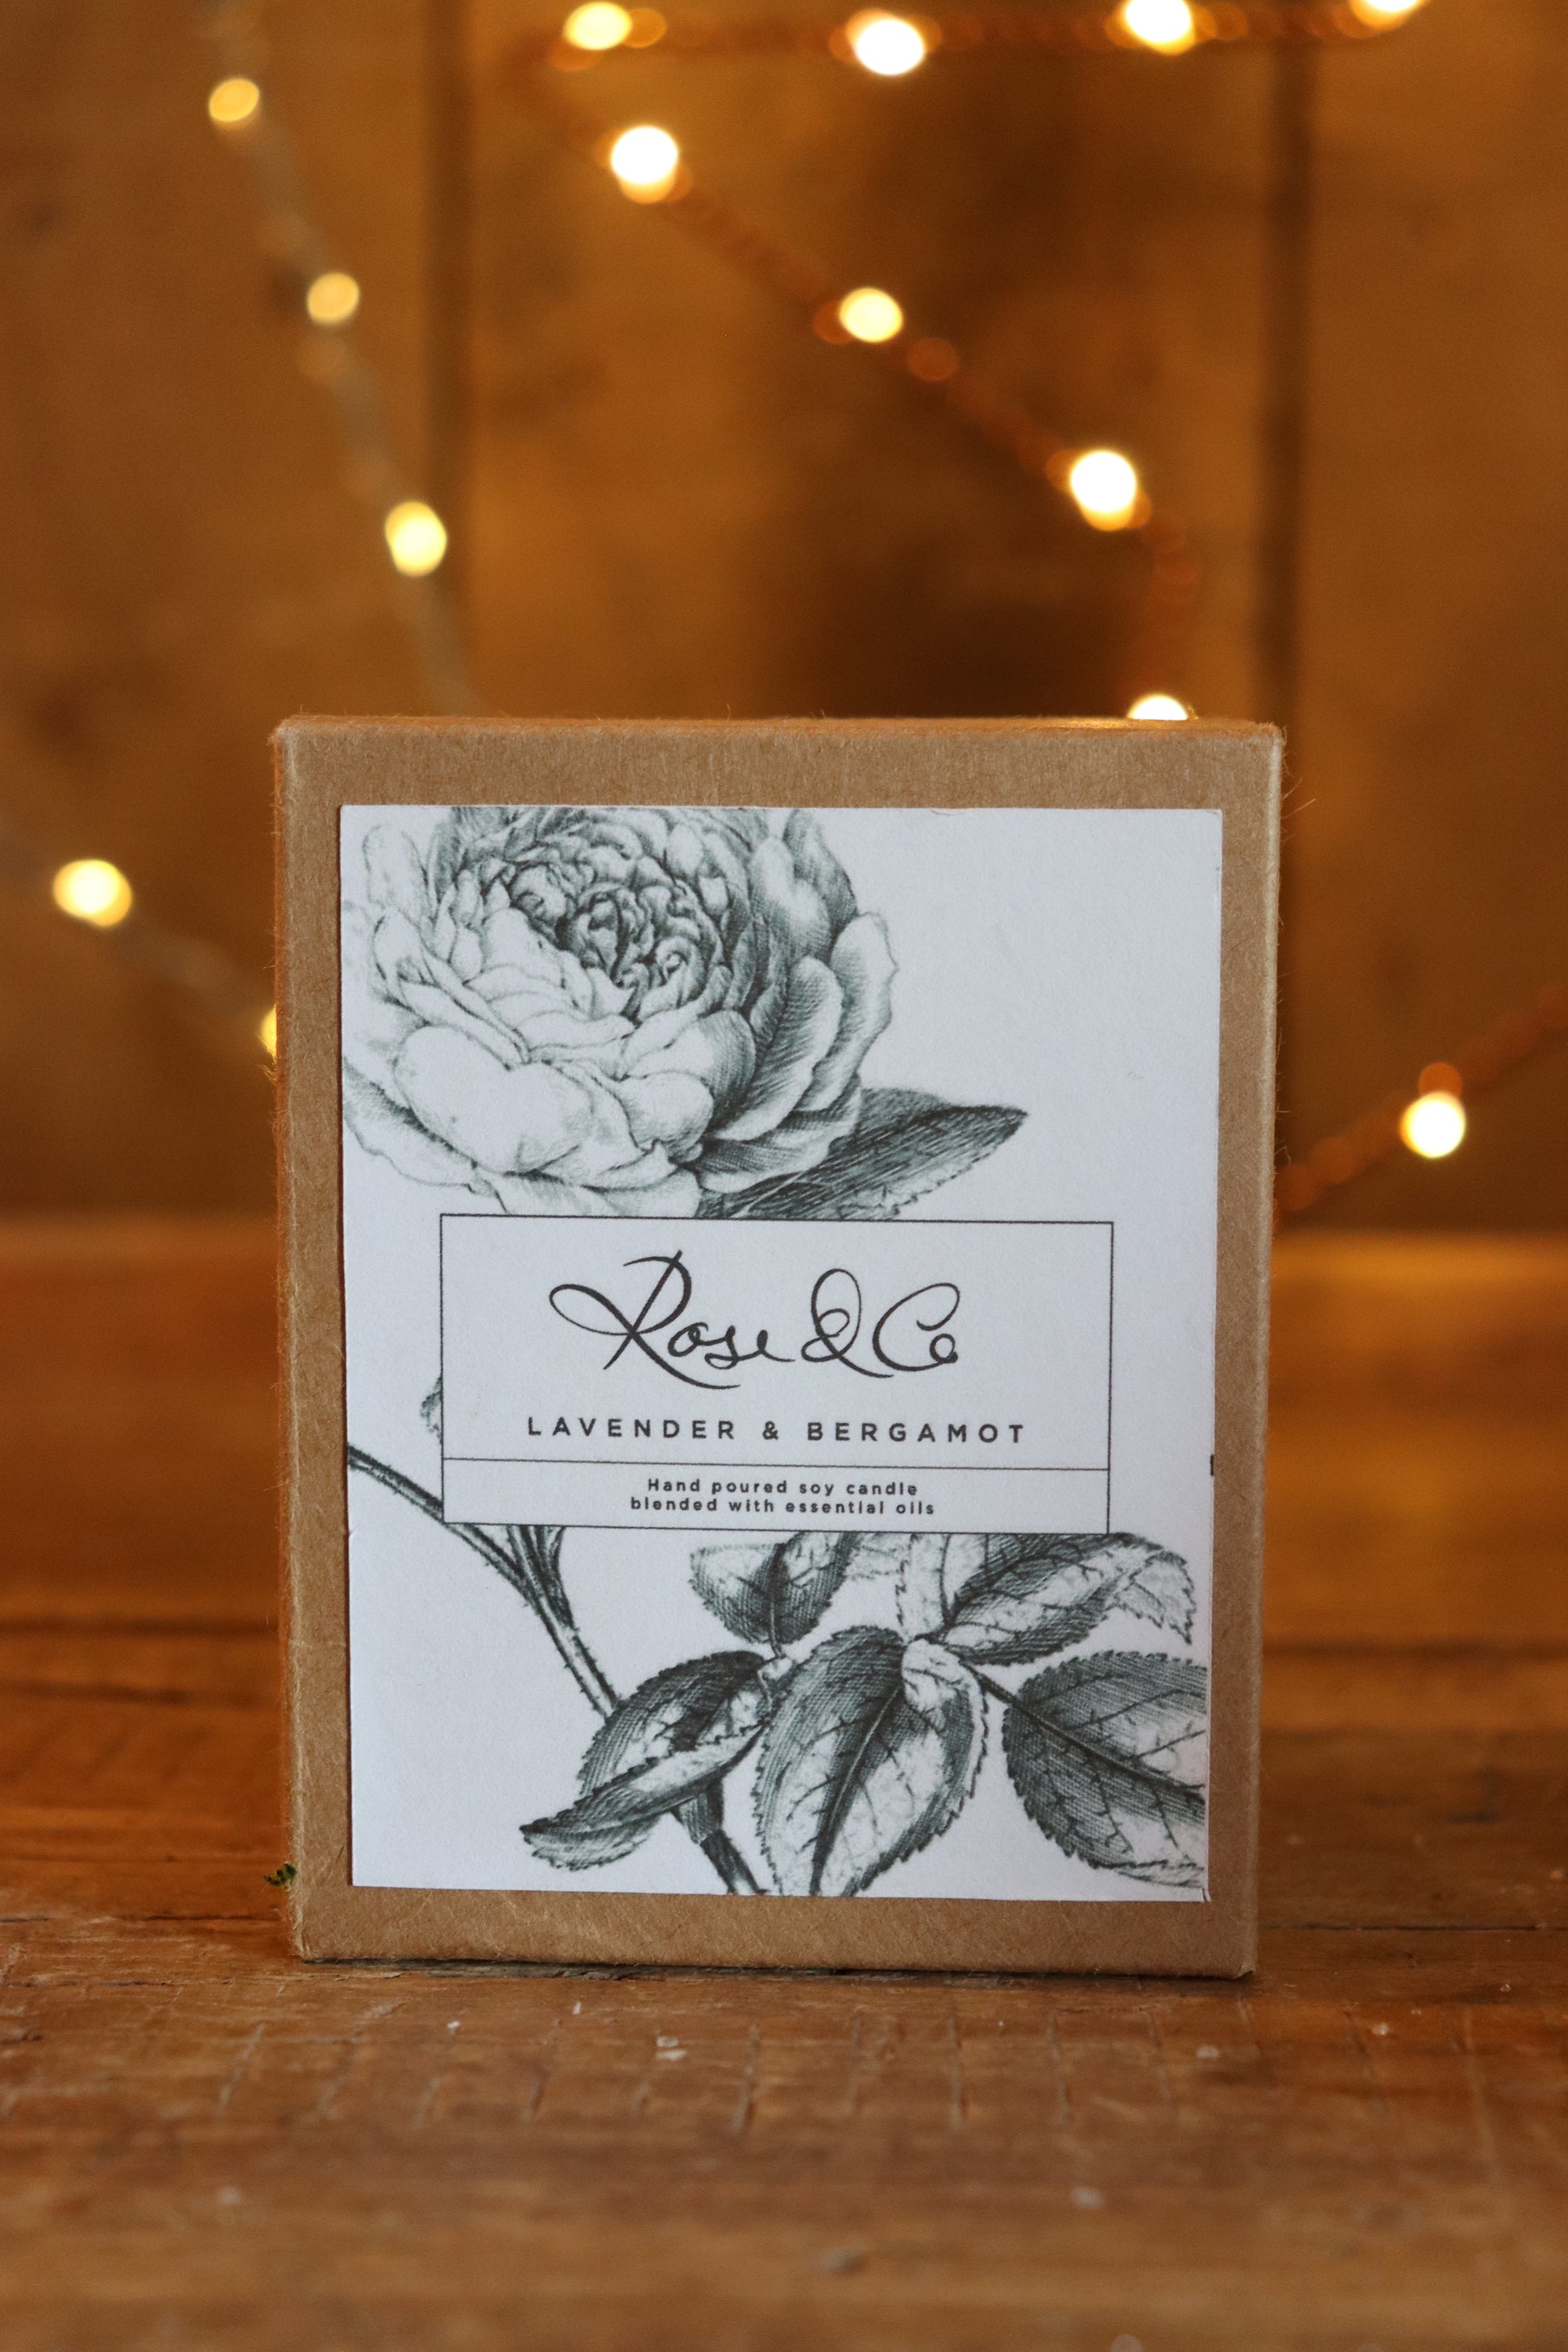 Rose & Co lavender and bergamot soy-wax candle with essential oils boxed